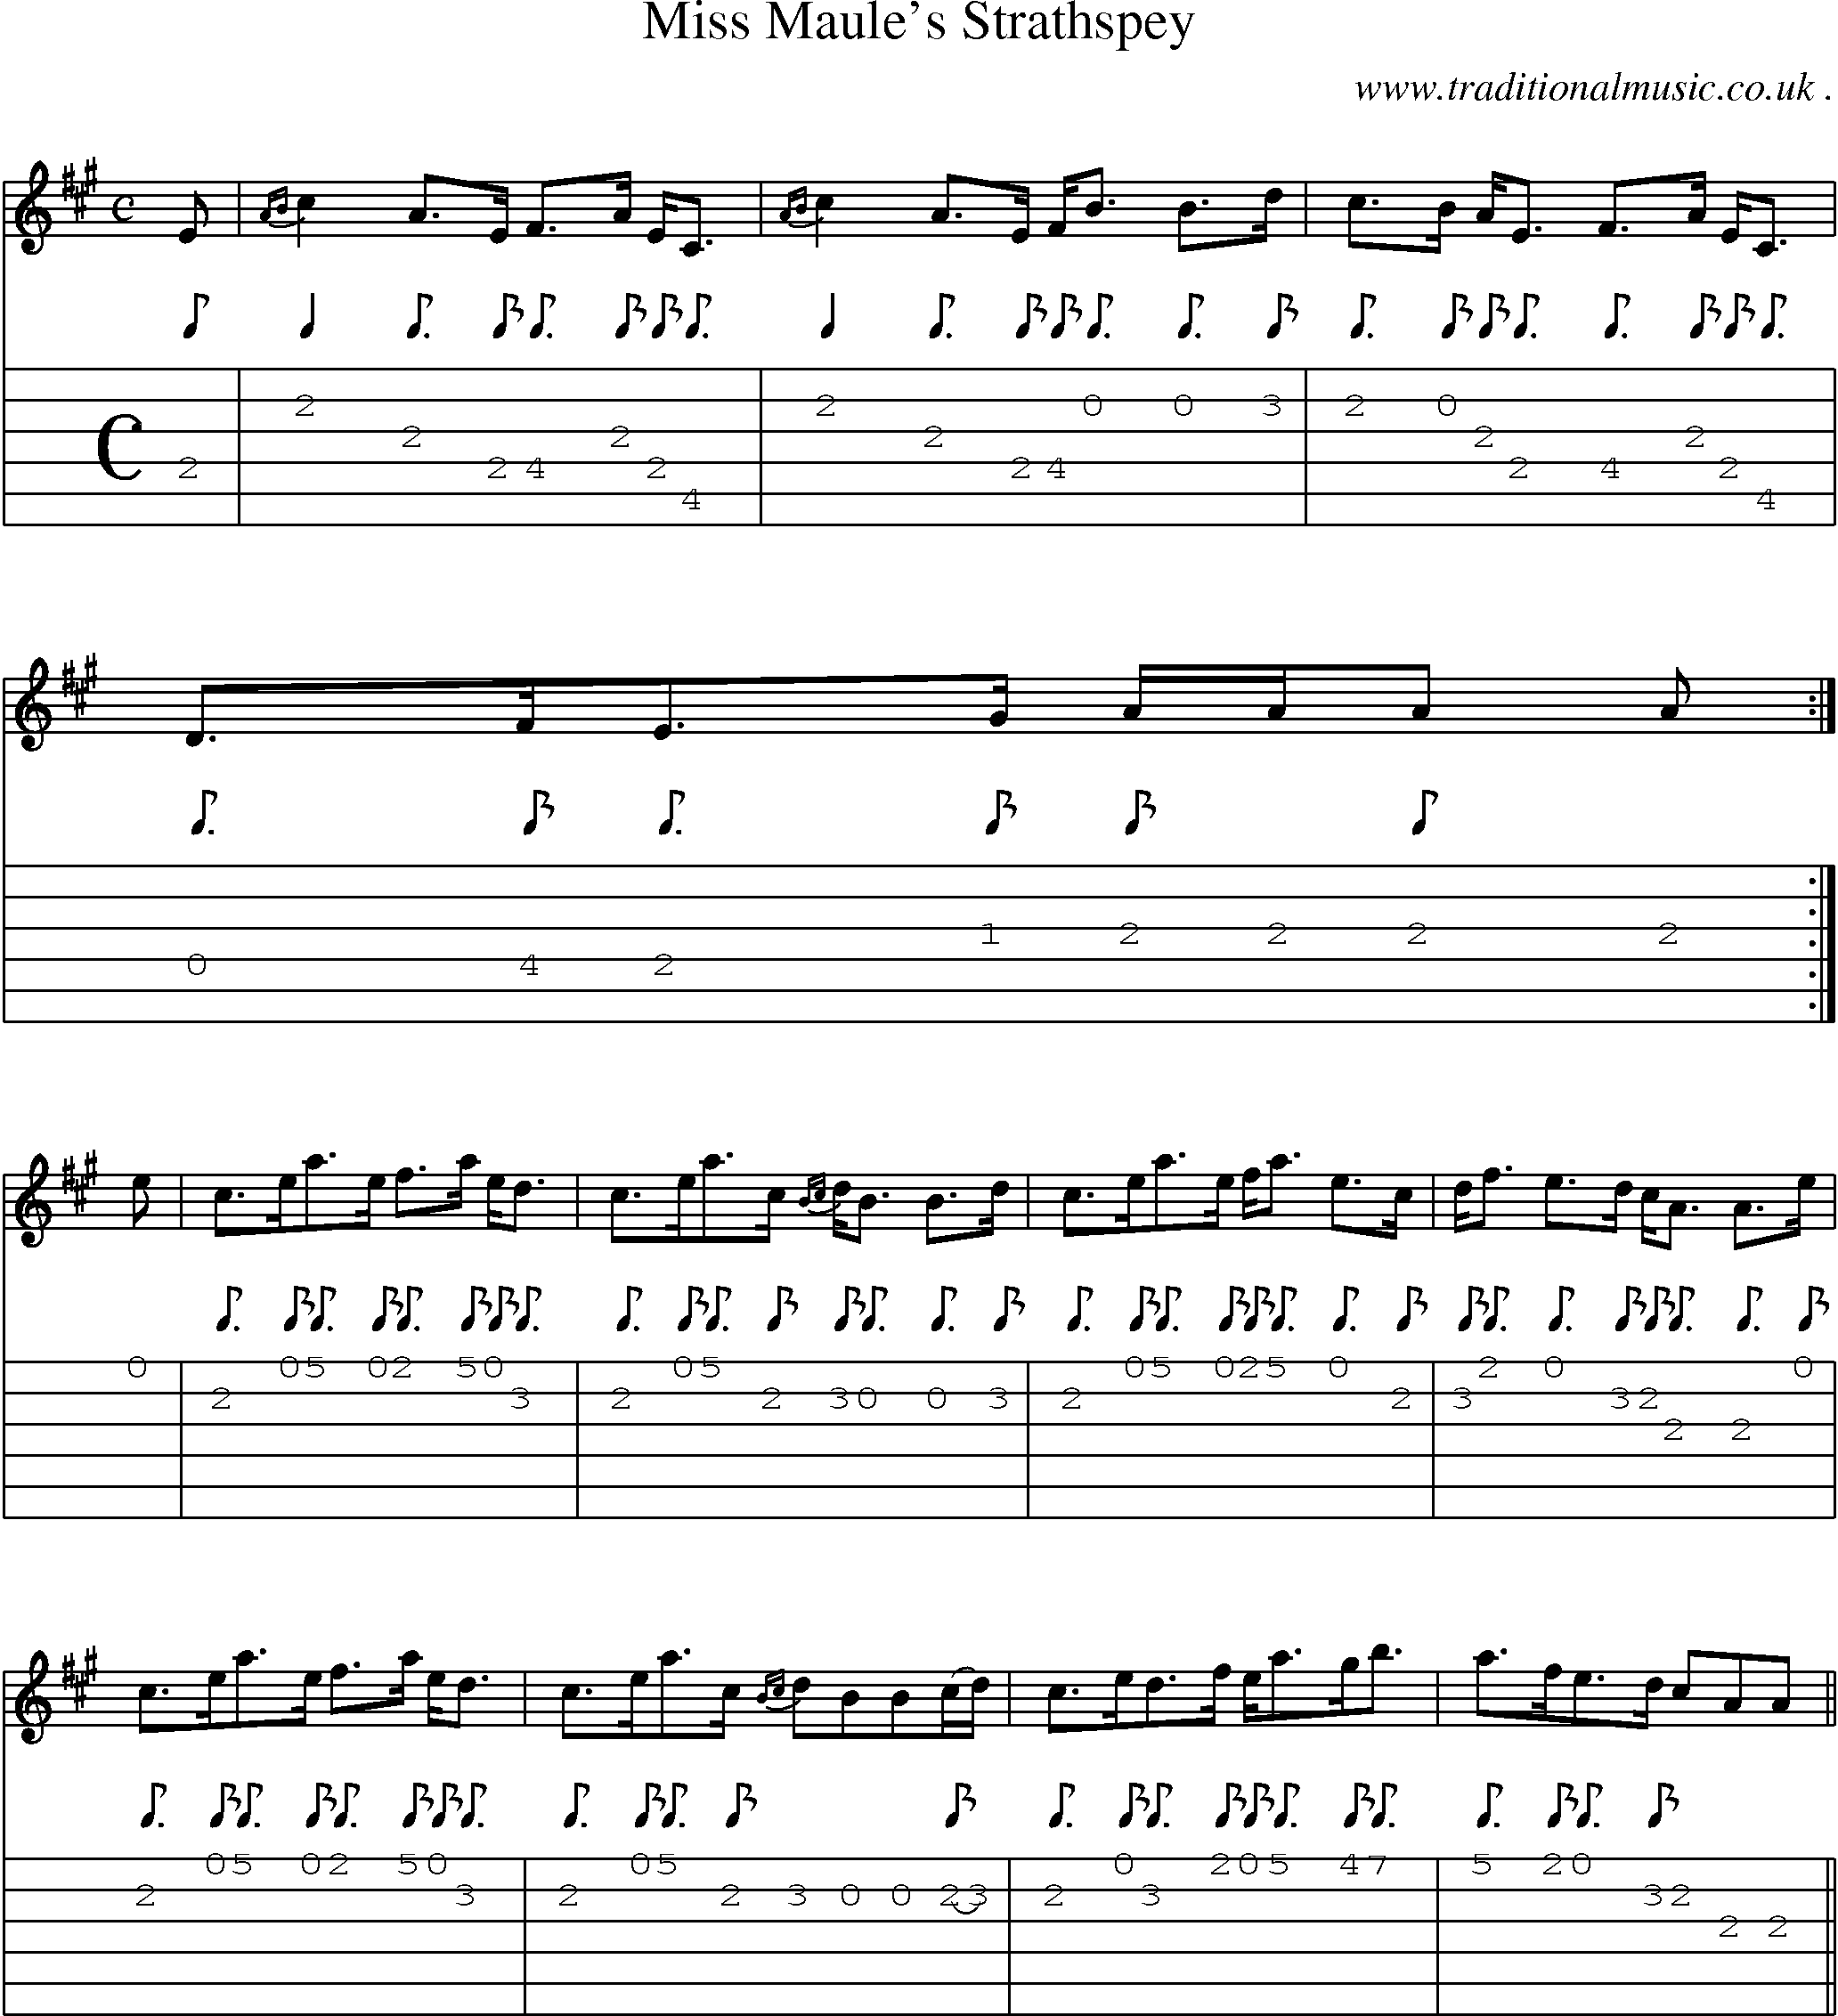 Sheet-music  score, Chords and Guitar Tabs for Miss Maules Strathspey